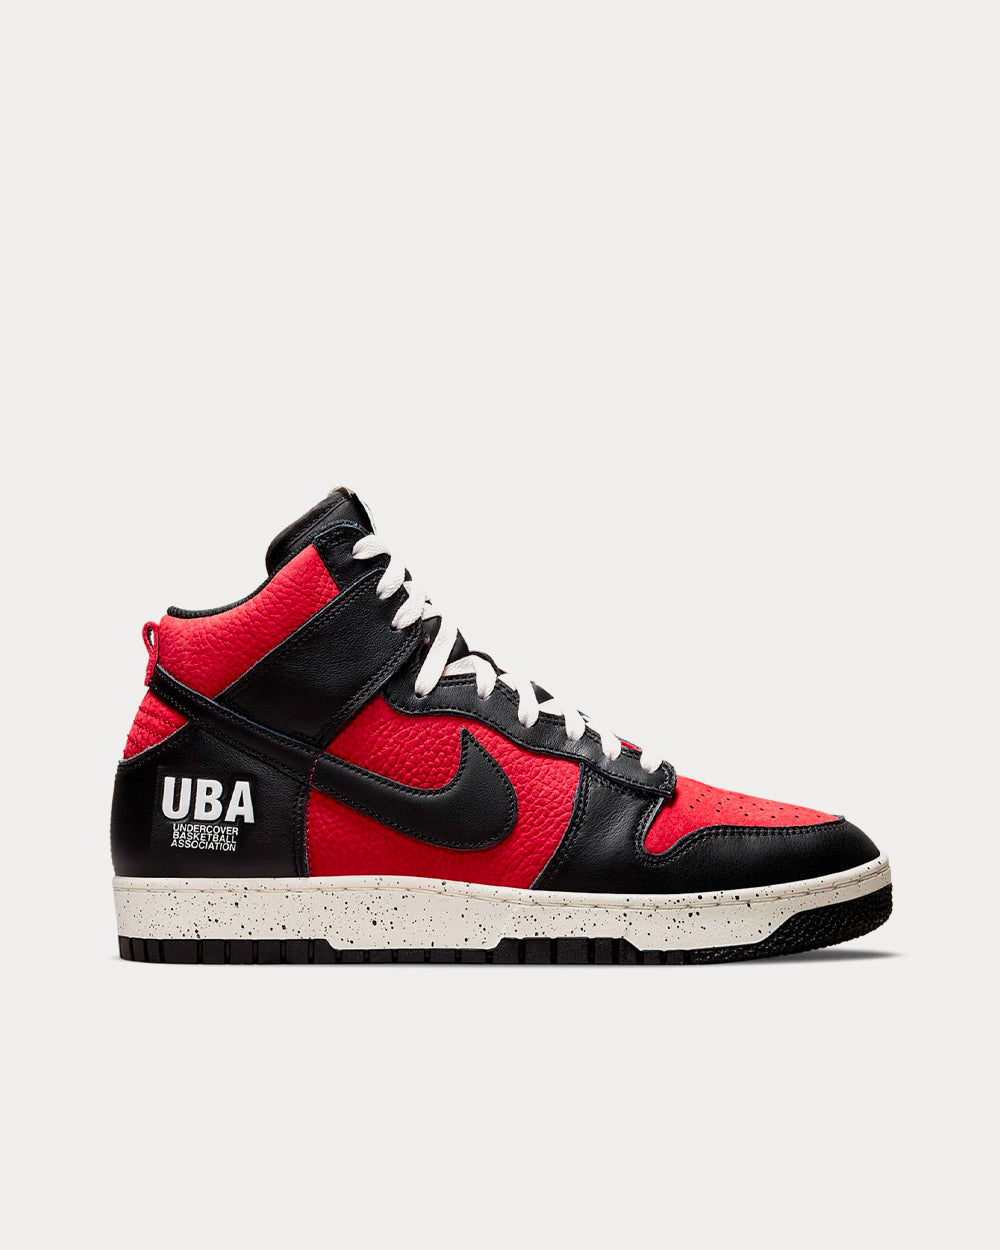 Nike x Undercover - Dunk Hi 1985 Gym Red / Black High Top Sneakers